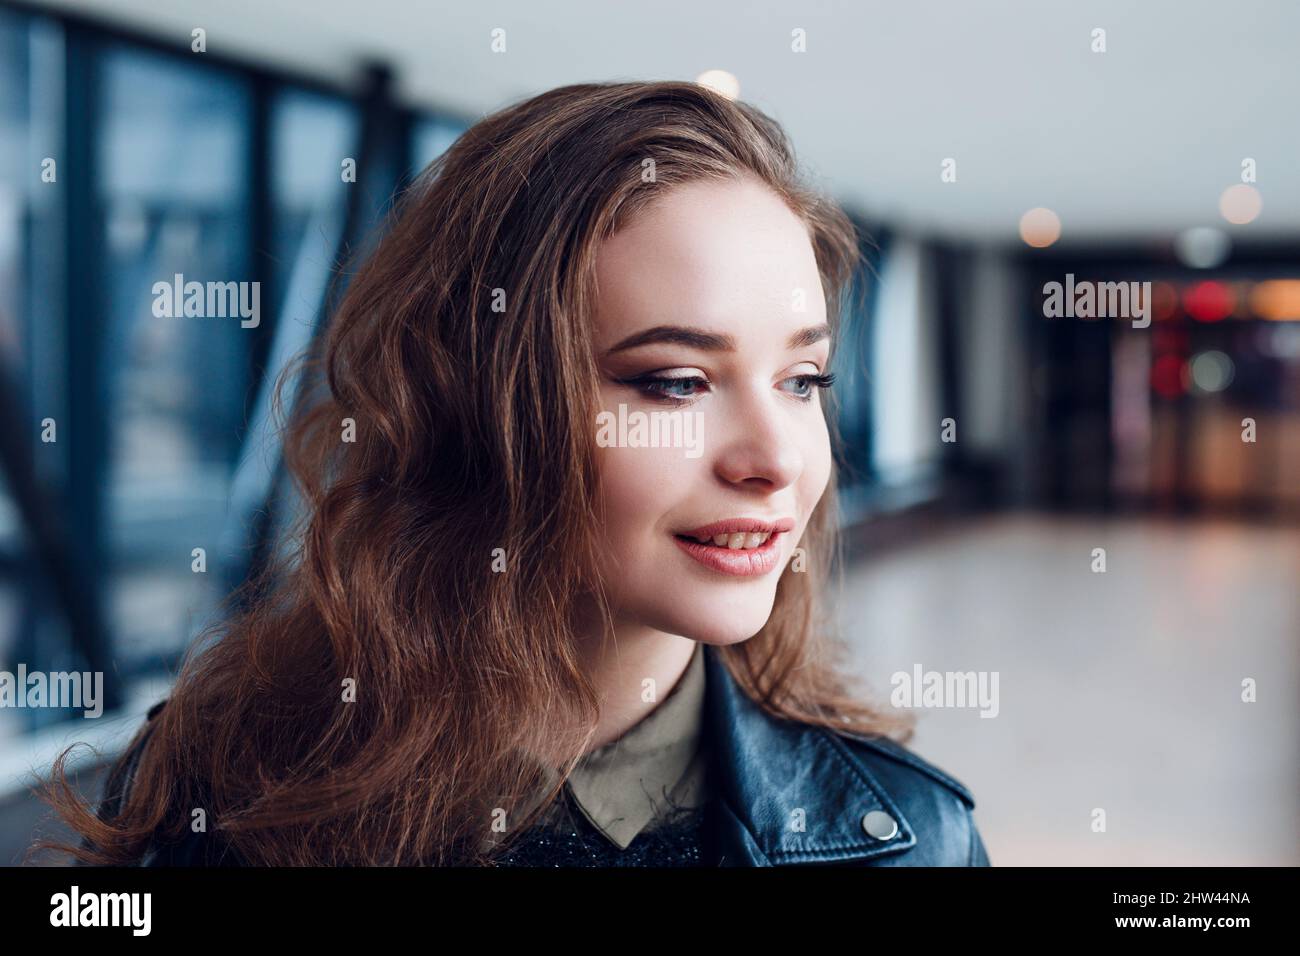 Close-up portrait of young stylish woman with curly hair. Student girl Stock Photo